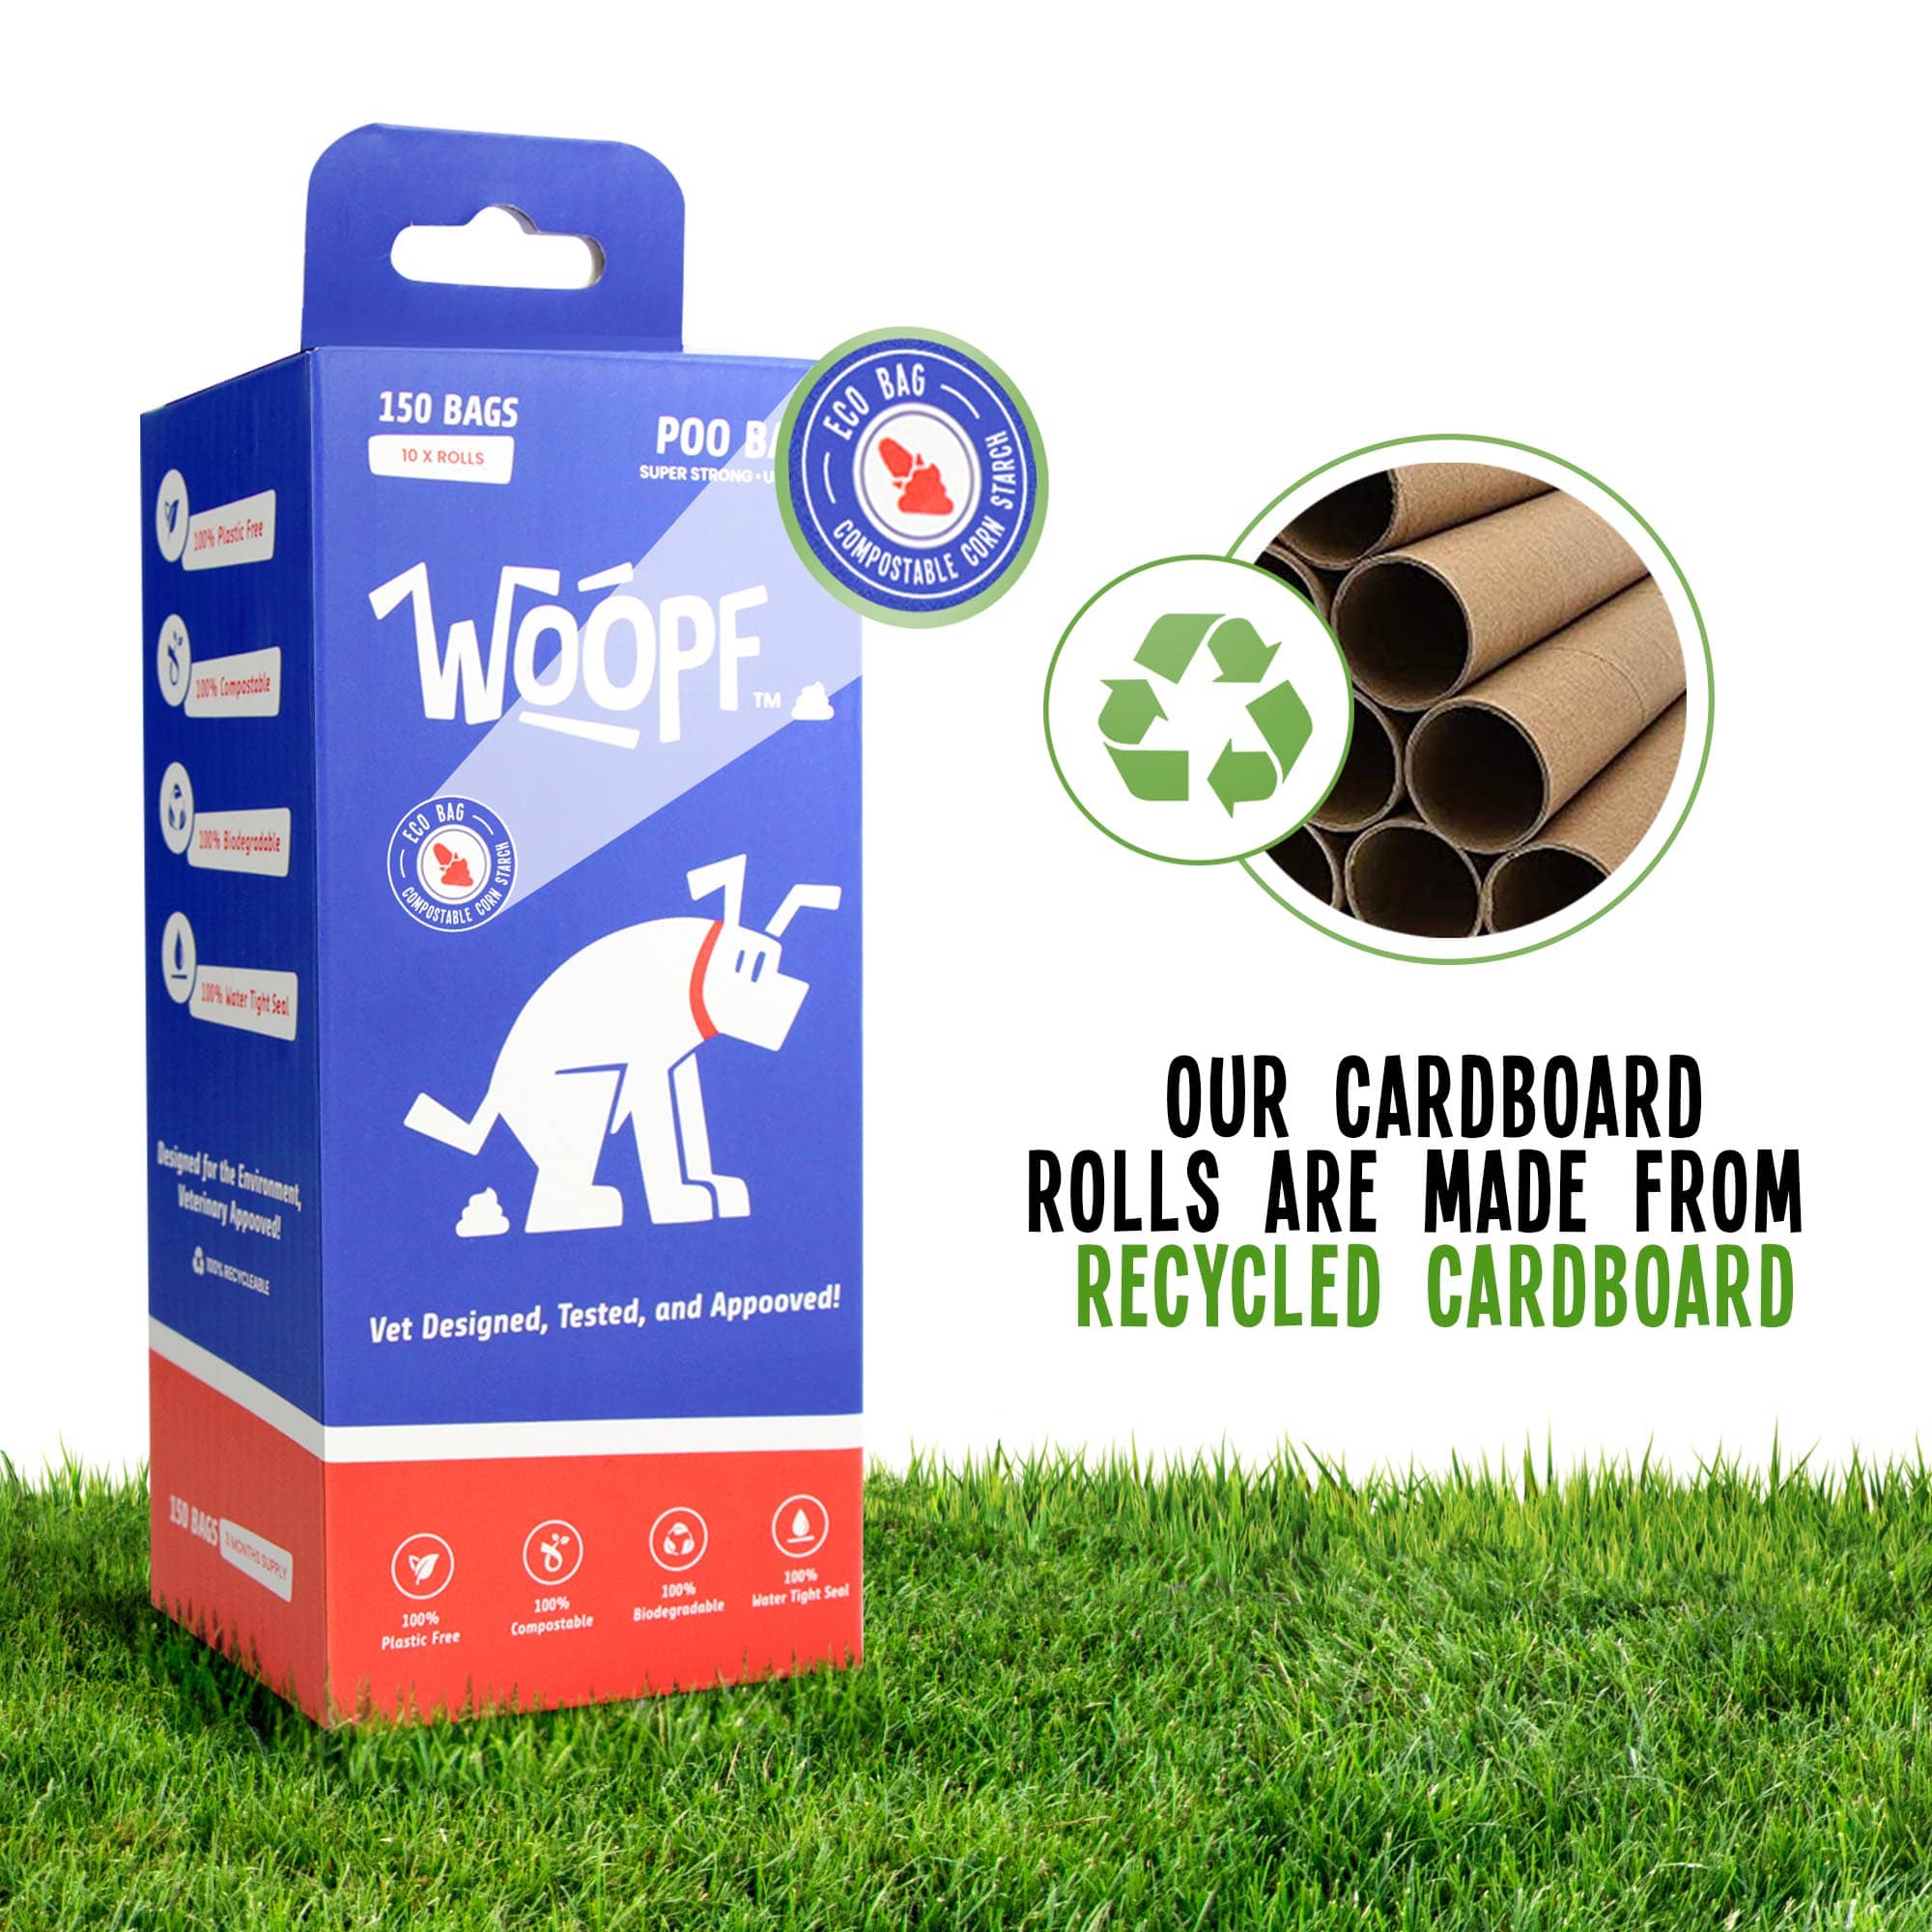 WOOPF 100% COMPOSTABLE (10 rolls x 15 Dog Poo Bags) | Vet Designed, Tested, and Approved | 23cm x 33cm (150 Count)